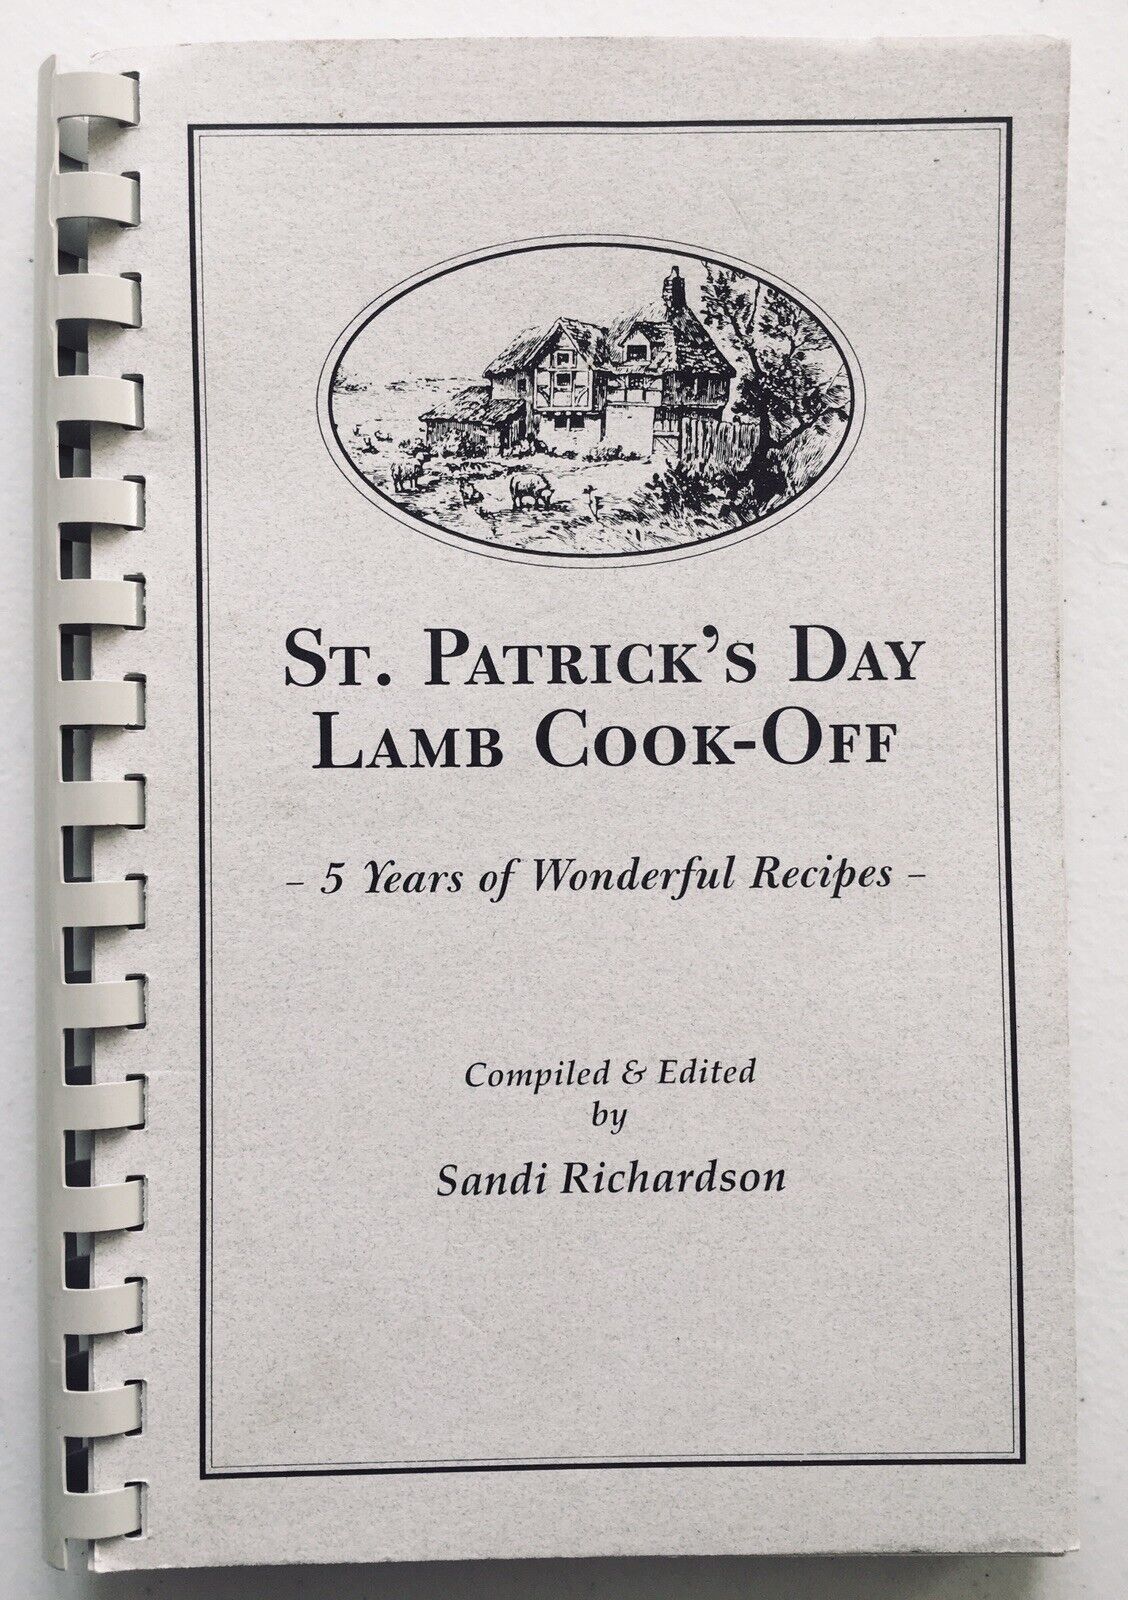 St. Patrick's Day LAMB COOK-OFF Cookbook Heppner, Oregon, 5 Years of Recipes 